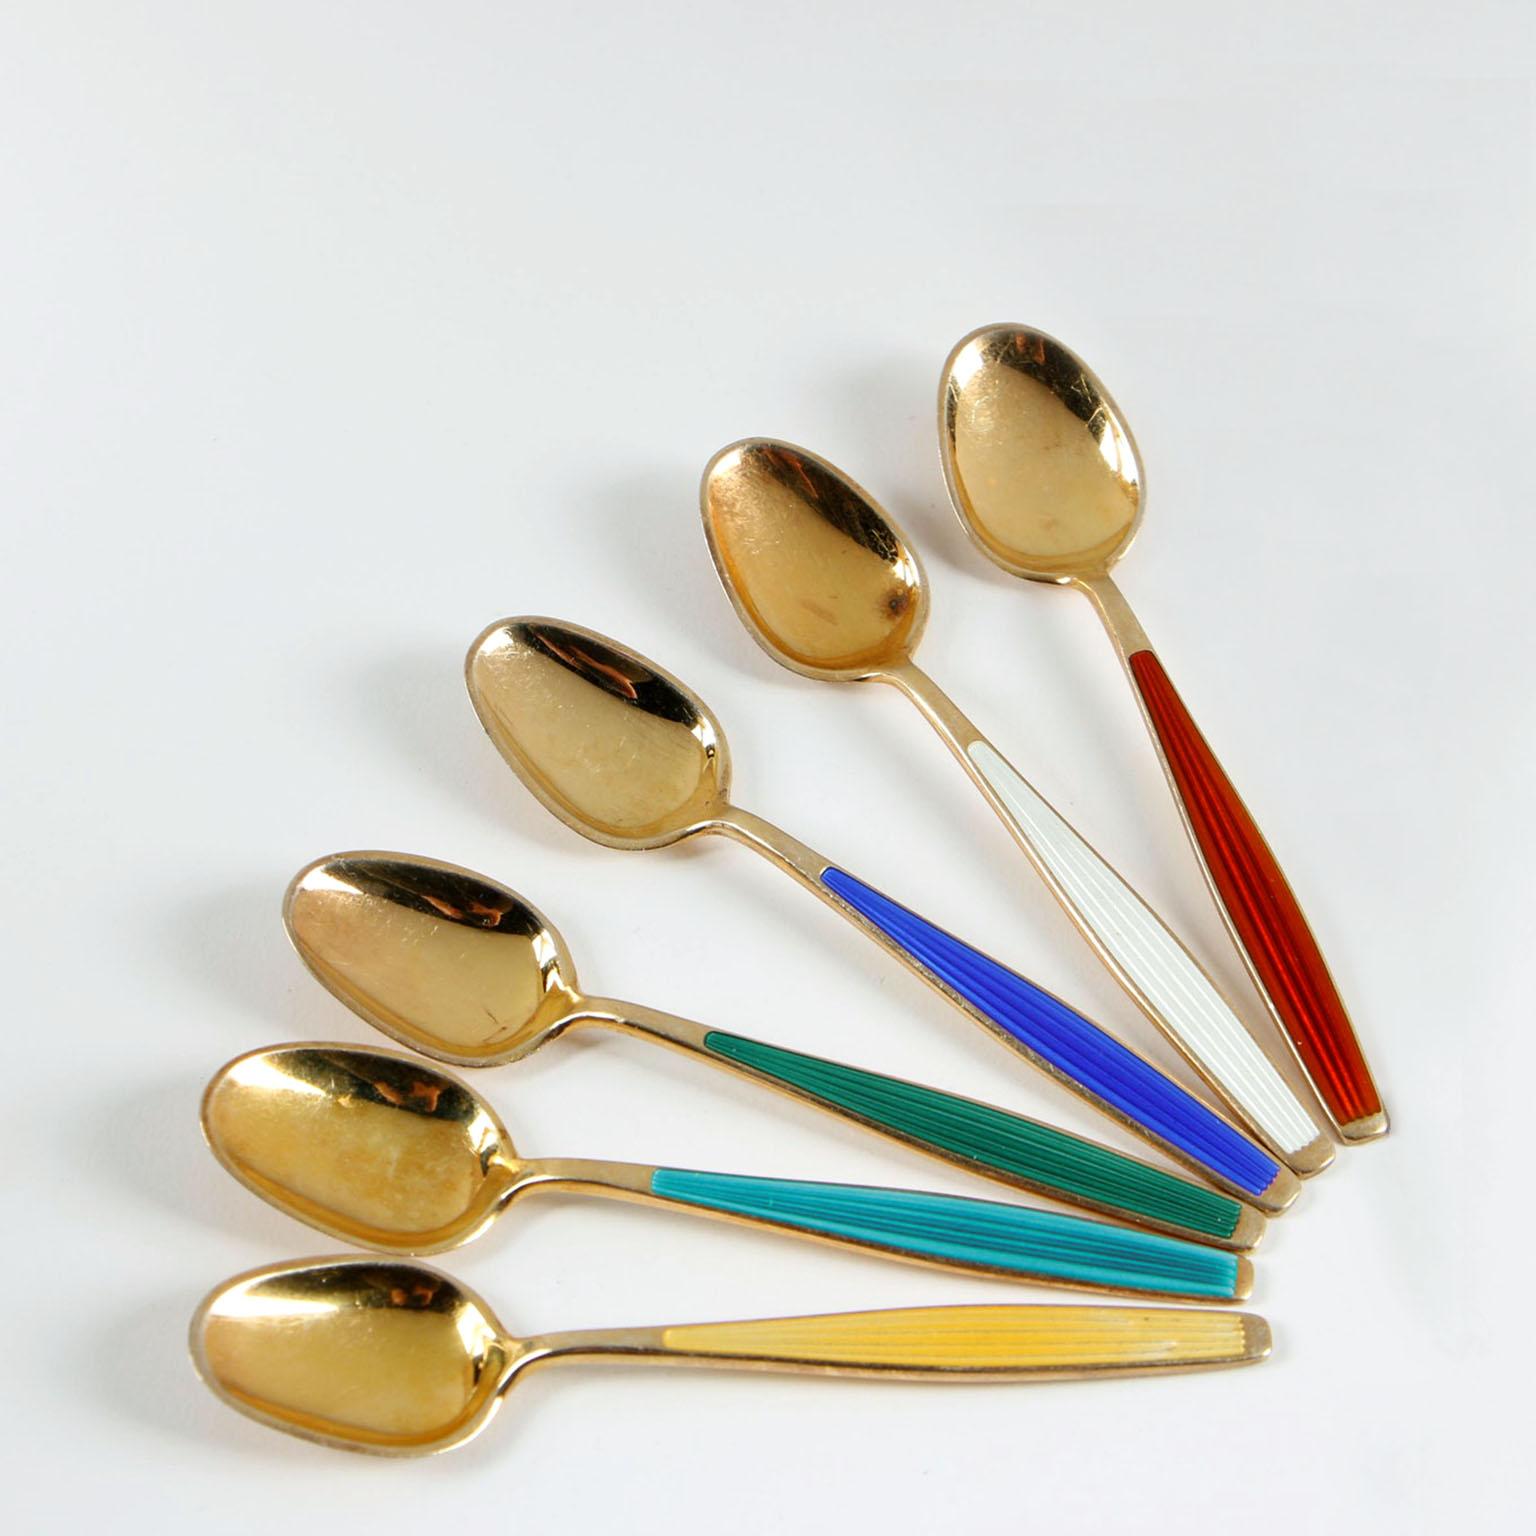 Twelve midcentury demitasse spoons, J.T. Norway, 1950s.
Clean line design, the pattern is very characteristic of the 1950s. Each spoon is made of sterling silver, richly gilt, stripes engraved pattern to the handle, filled and decorated with enamel